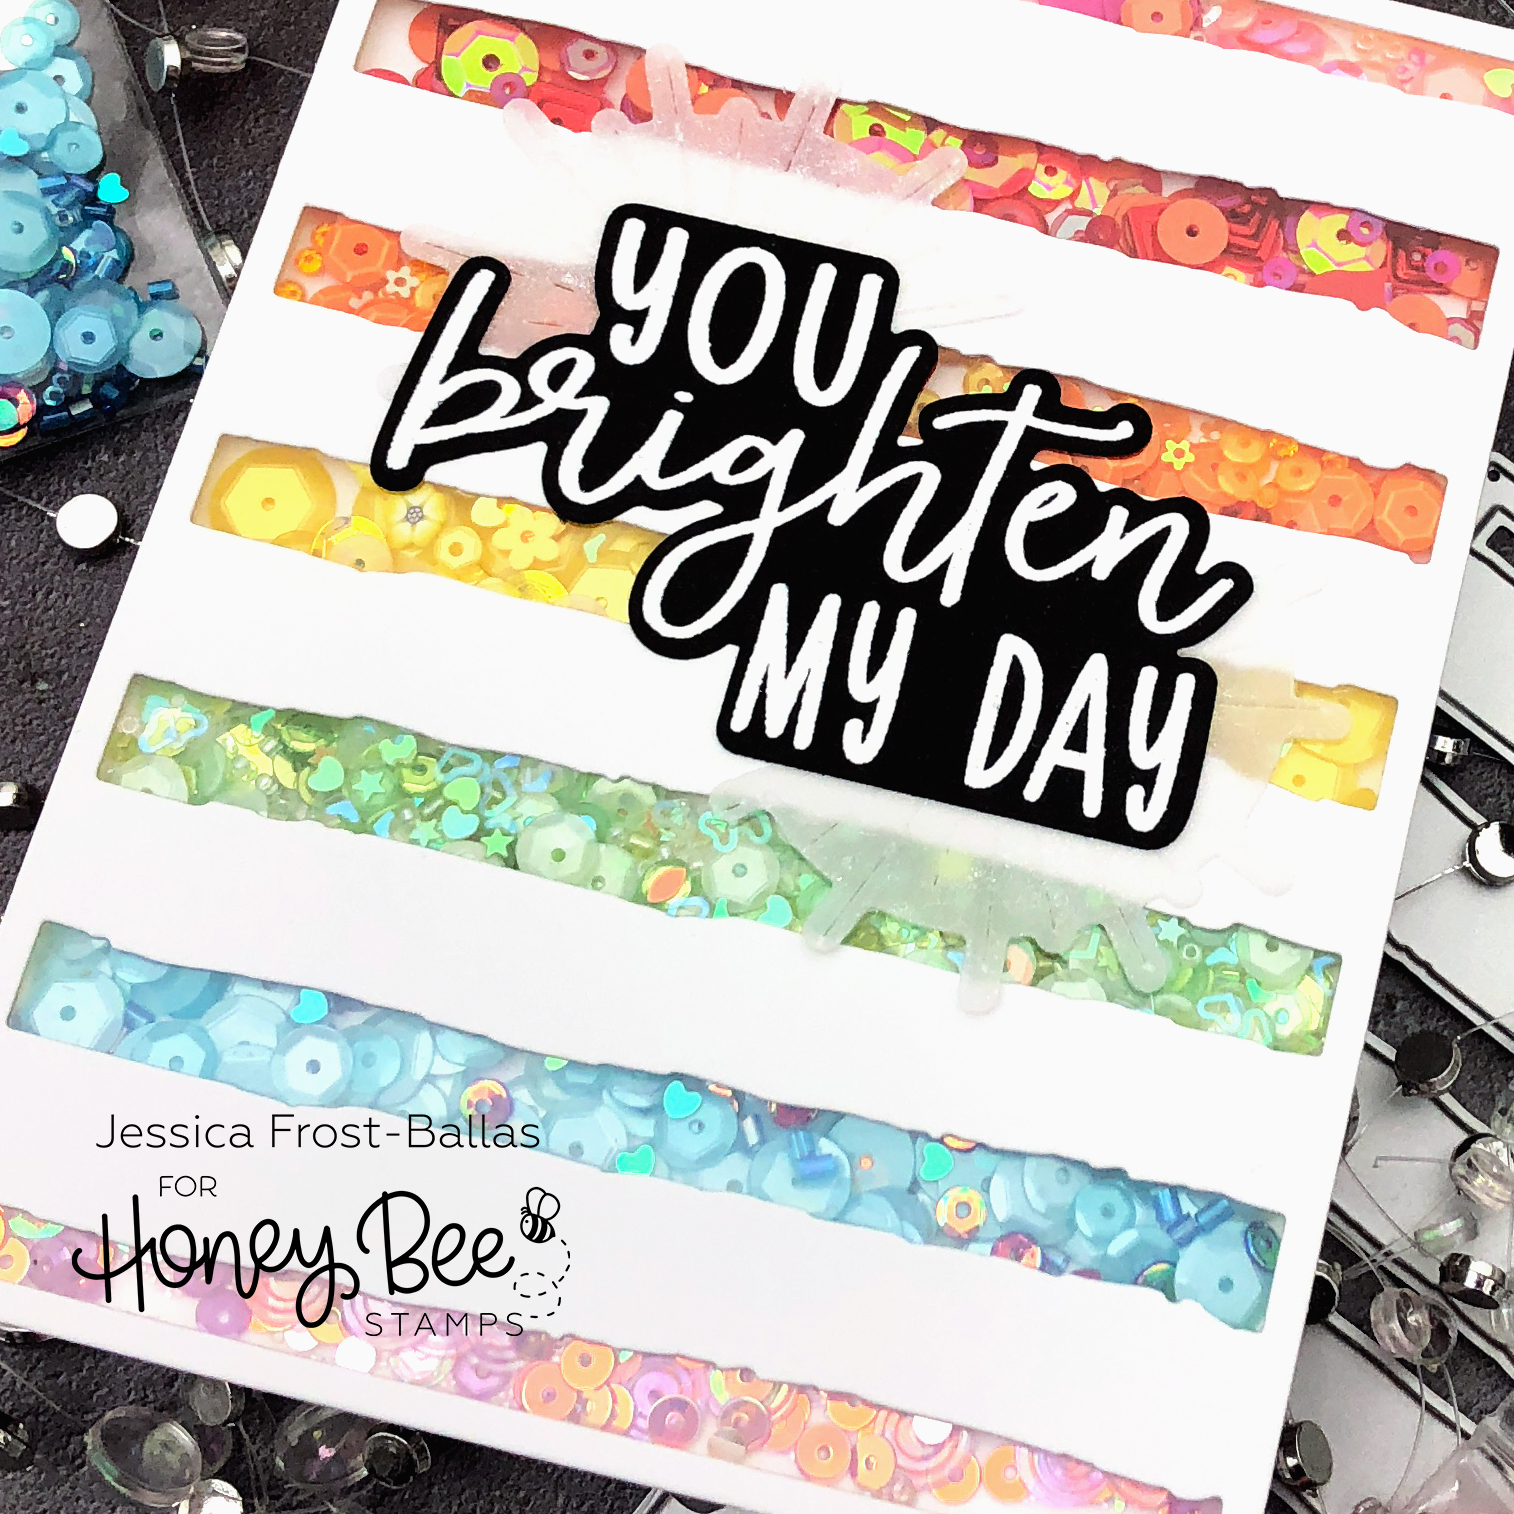 You Brighten My Day by Jessica Frost-Ballas for Honey Bee Stamps